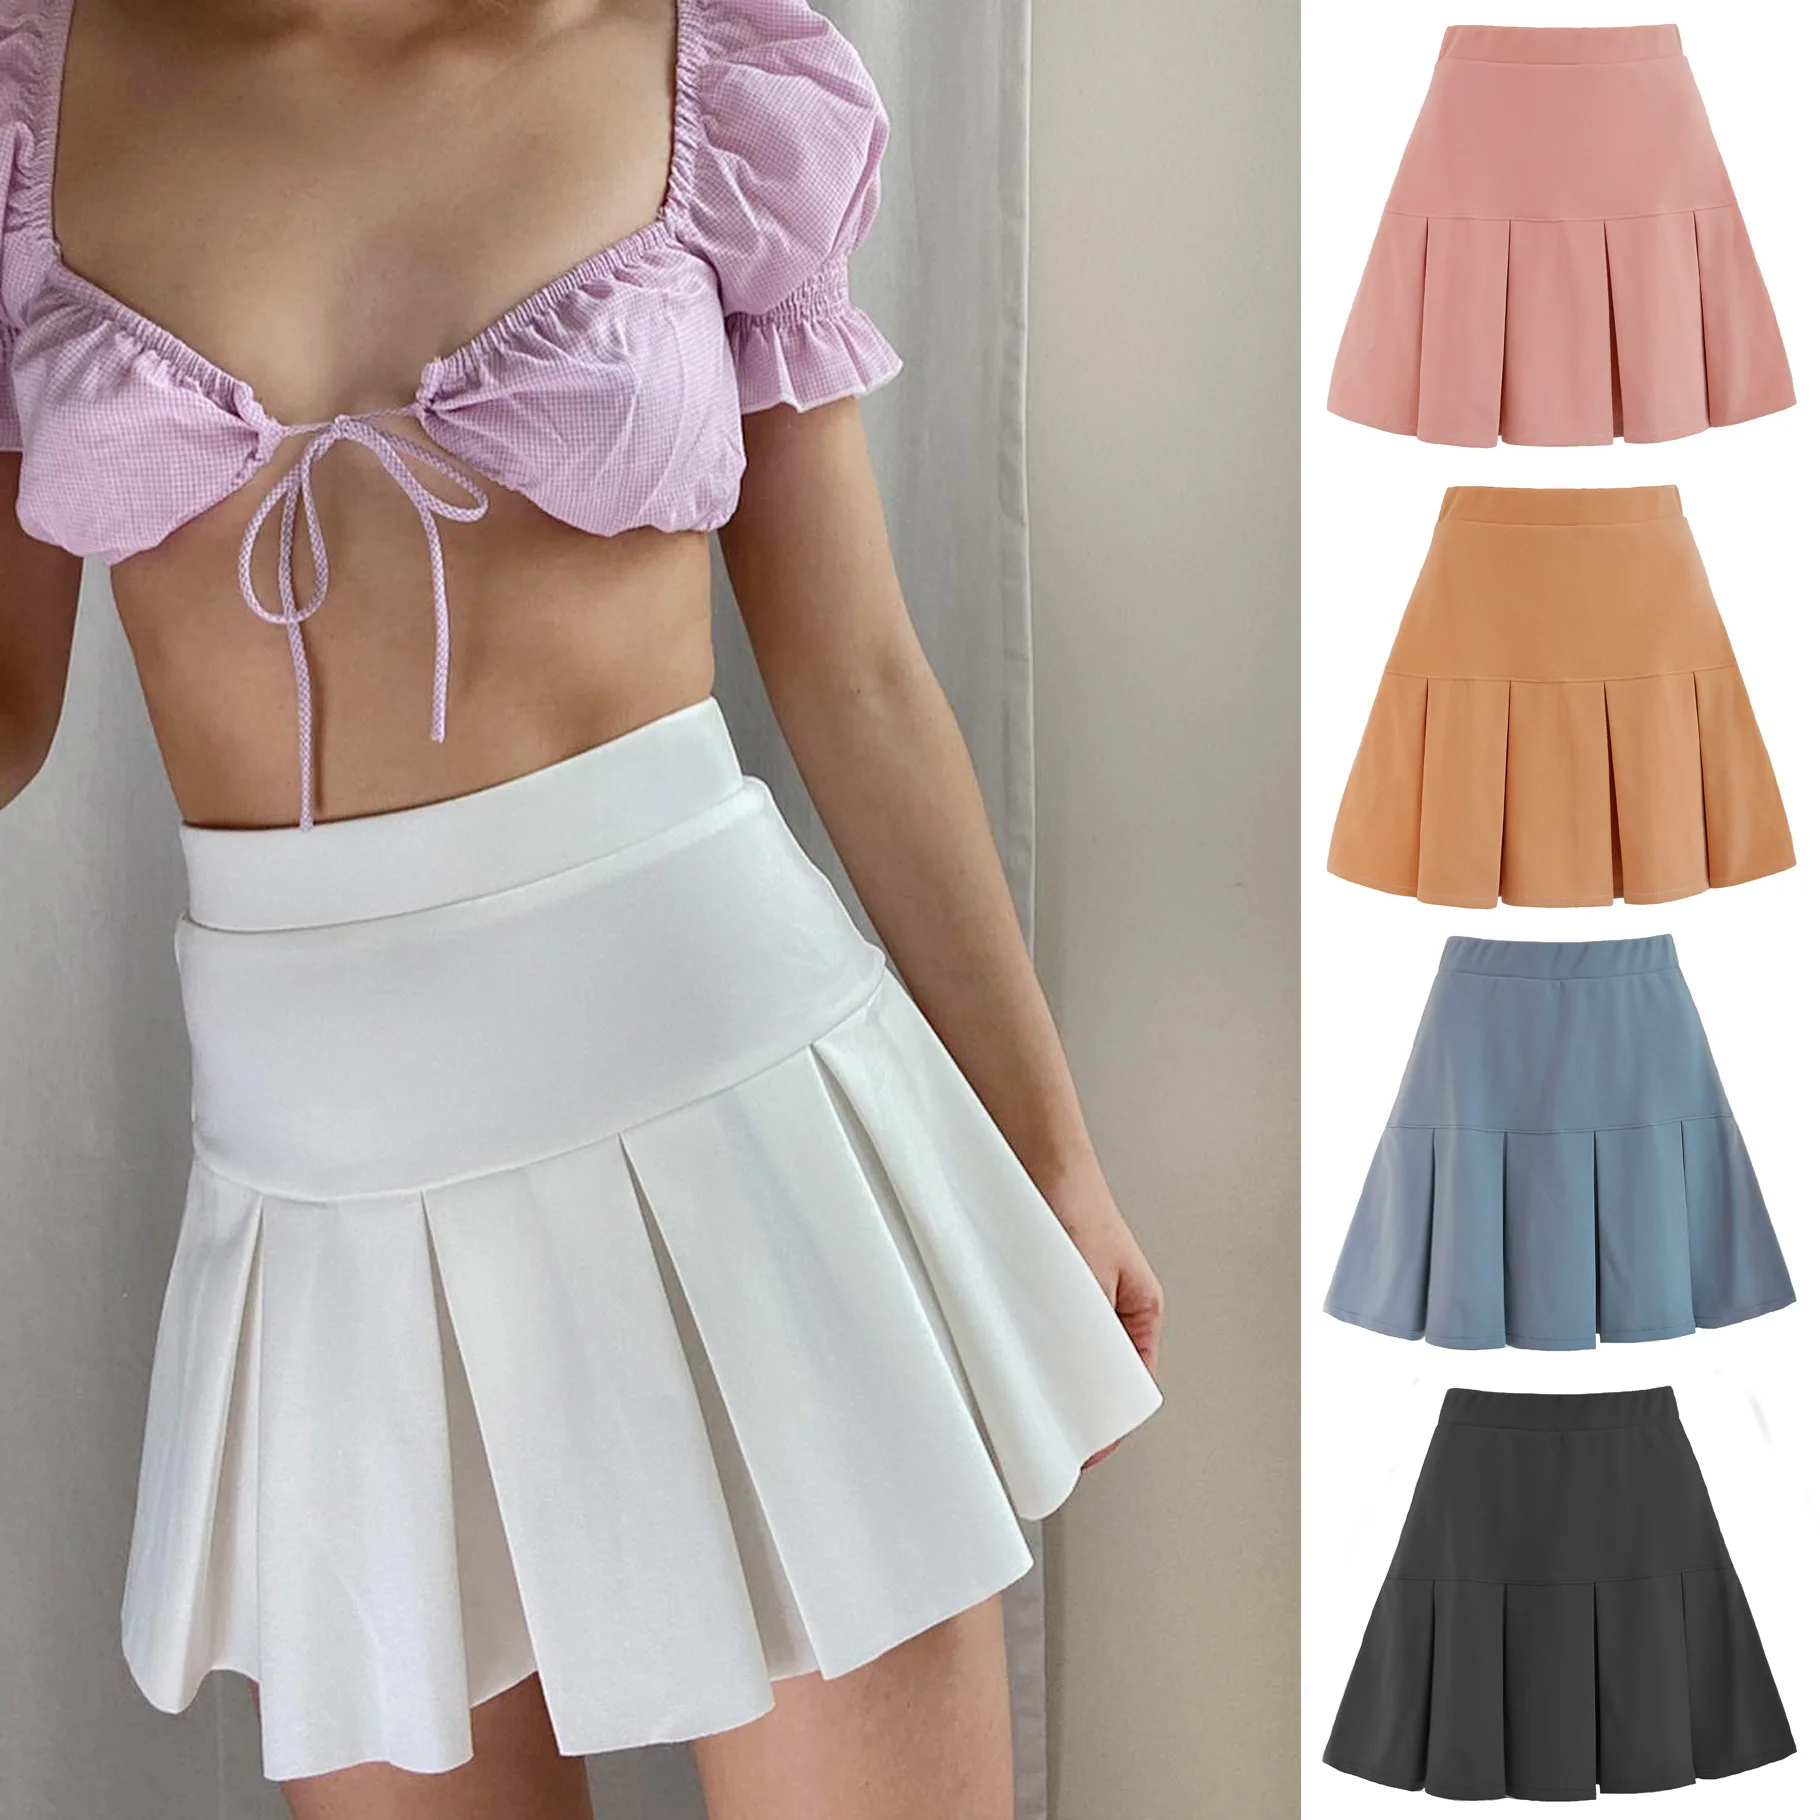 2022 New Sexy Solid Color High-waisted Skirt Black White Folds Korean Fashion Hot Woman Clothing With Free Shipping To Ukraine